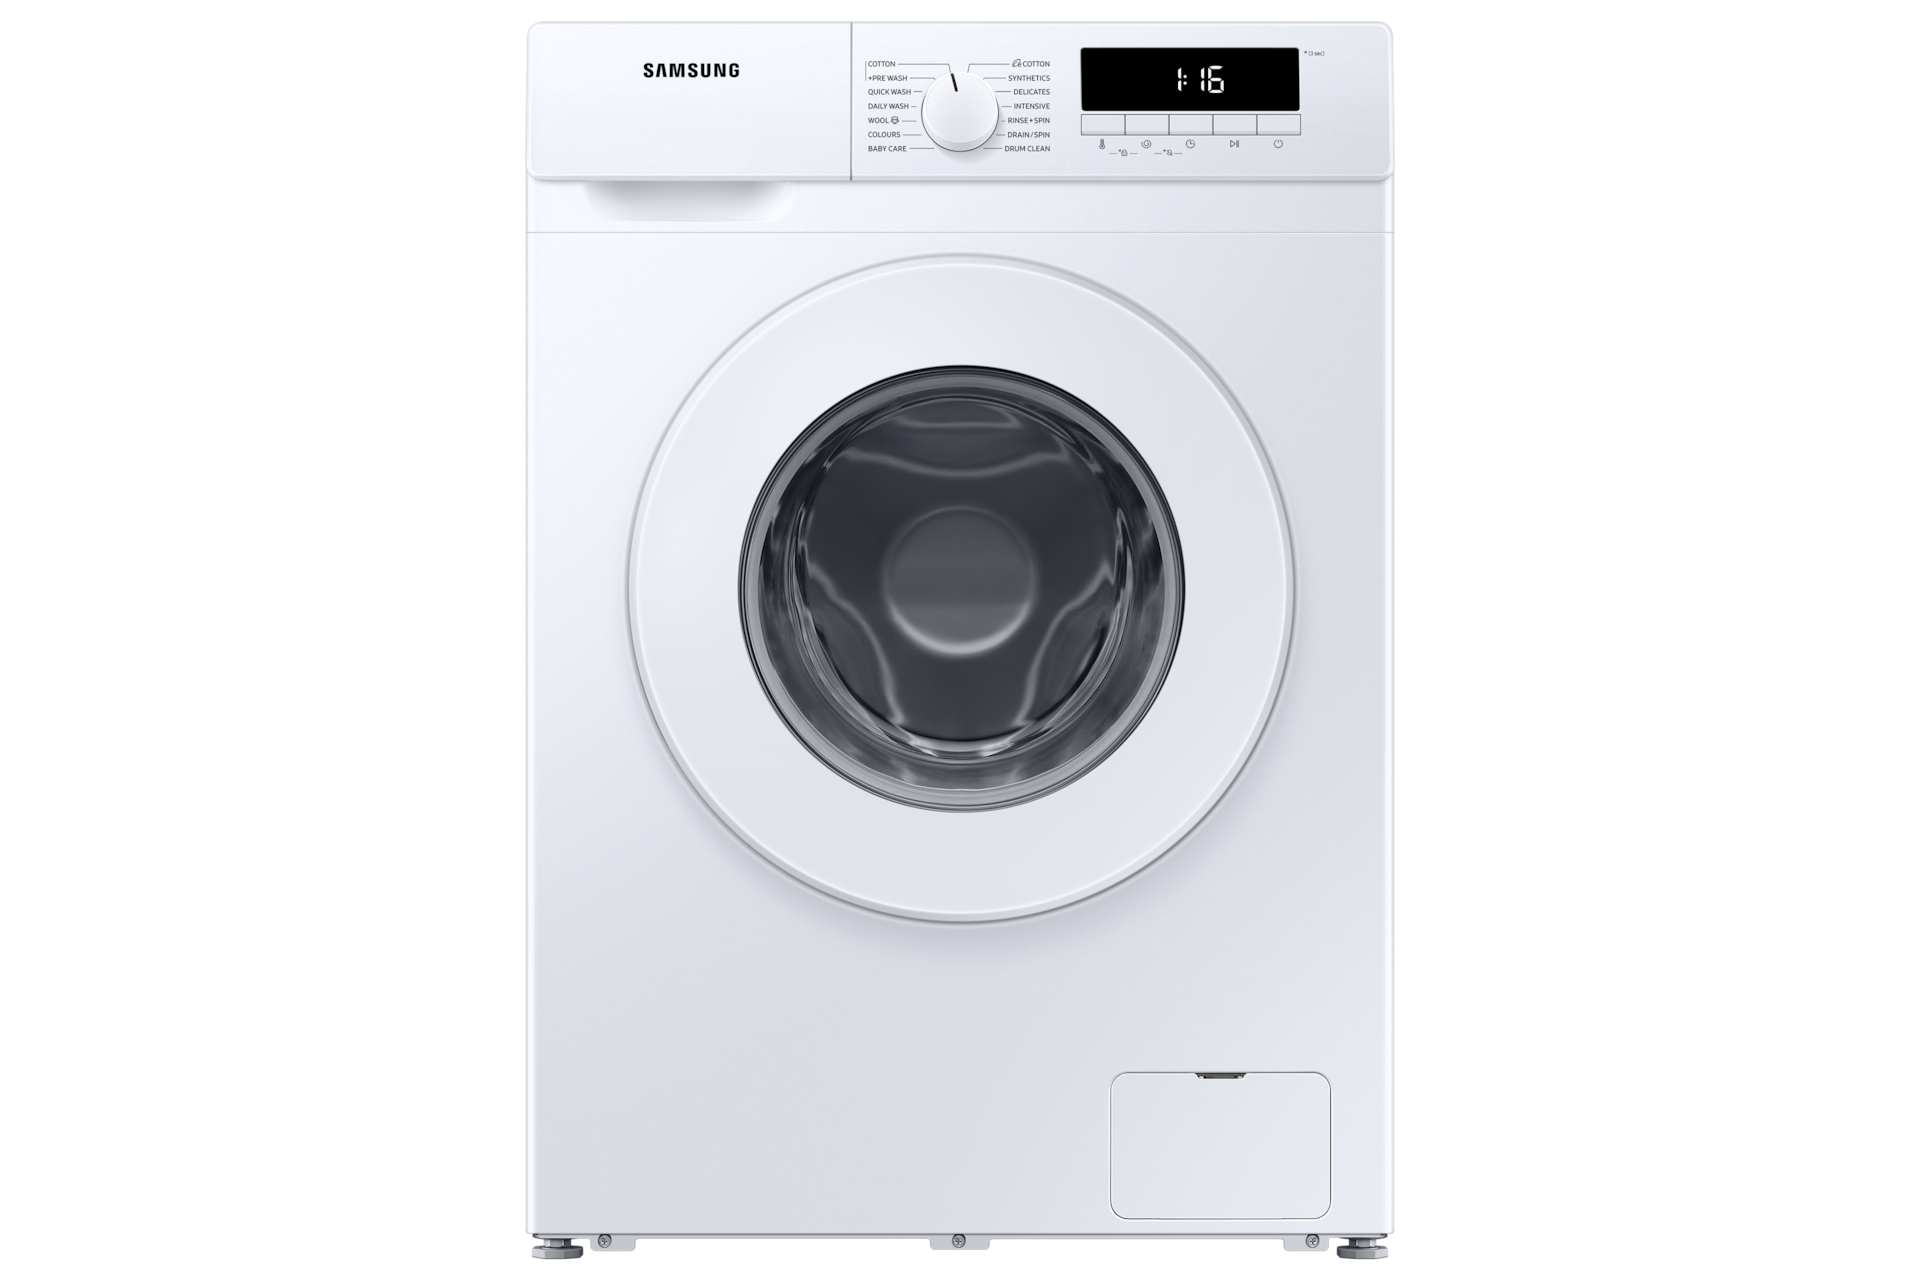 Buy Samsung WW70T3020WW/SP now. Image shows front view of Front Load Washer, 7kg, 3 Ticks in white